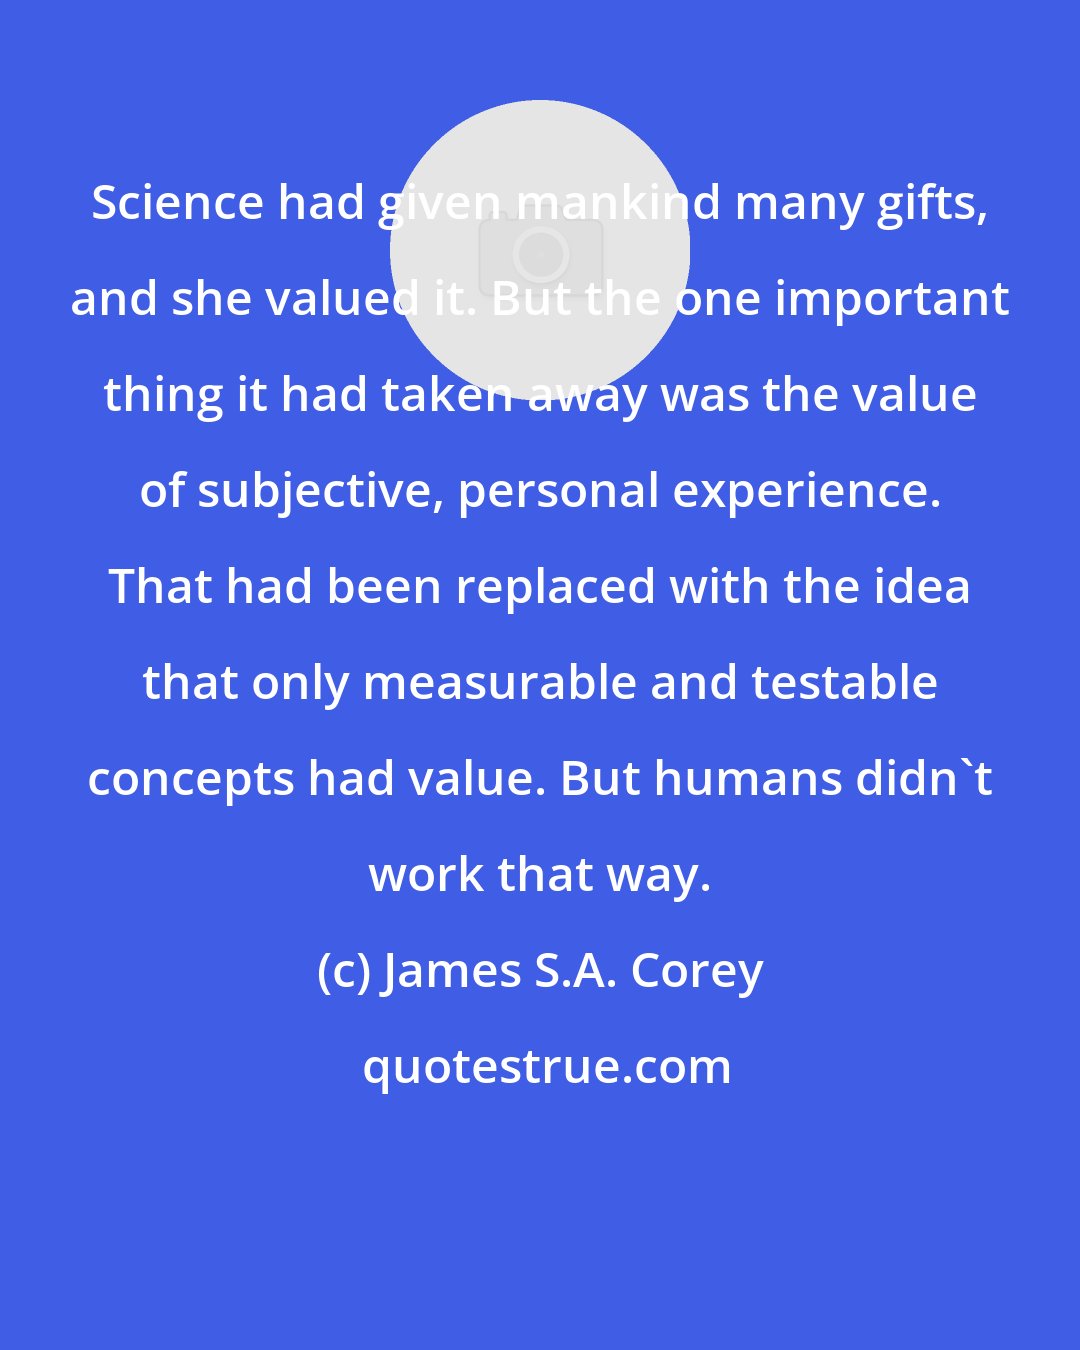 James S.A. Corey: Science had given mankind many gifts, and she valued it. But the one important thing it had taken away was the value of subjective, personal experience. That had been replaced with the idea that only measurable and testable concepts had value. But humans didn't work that way.